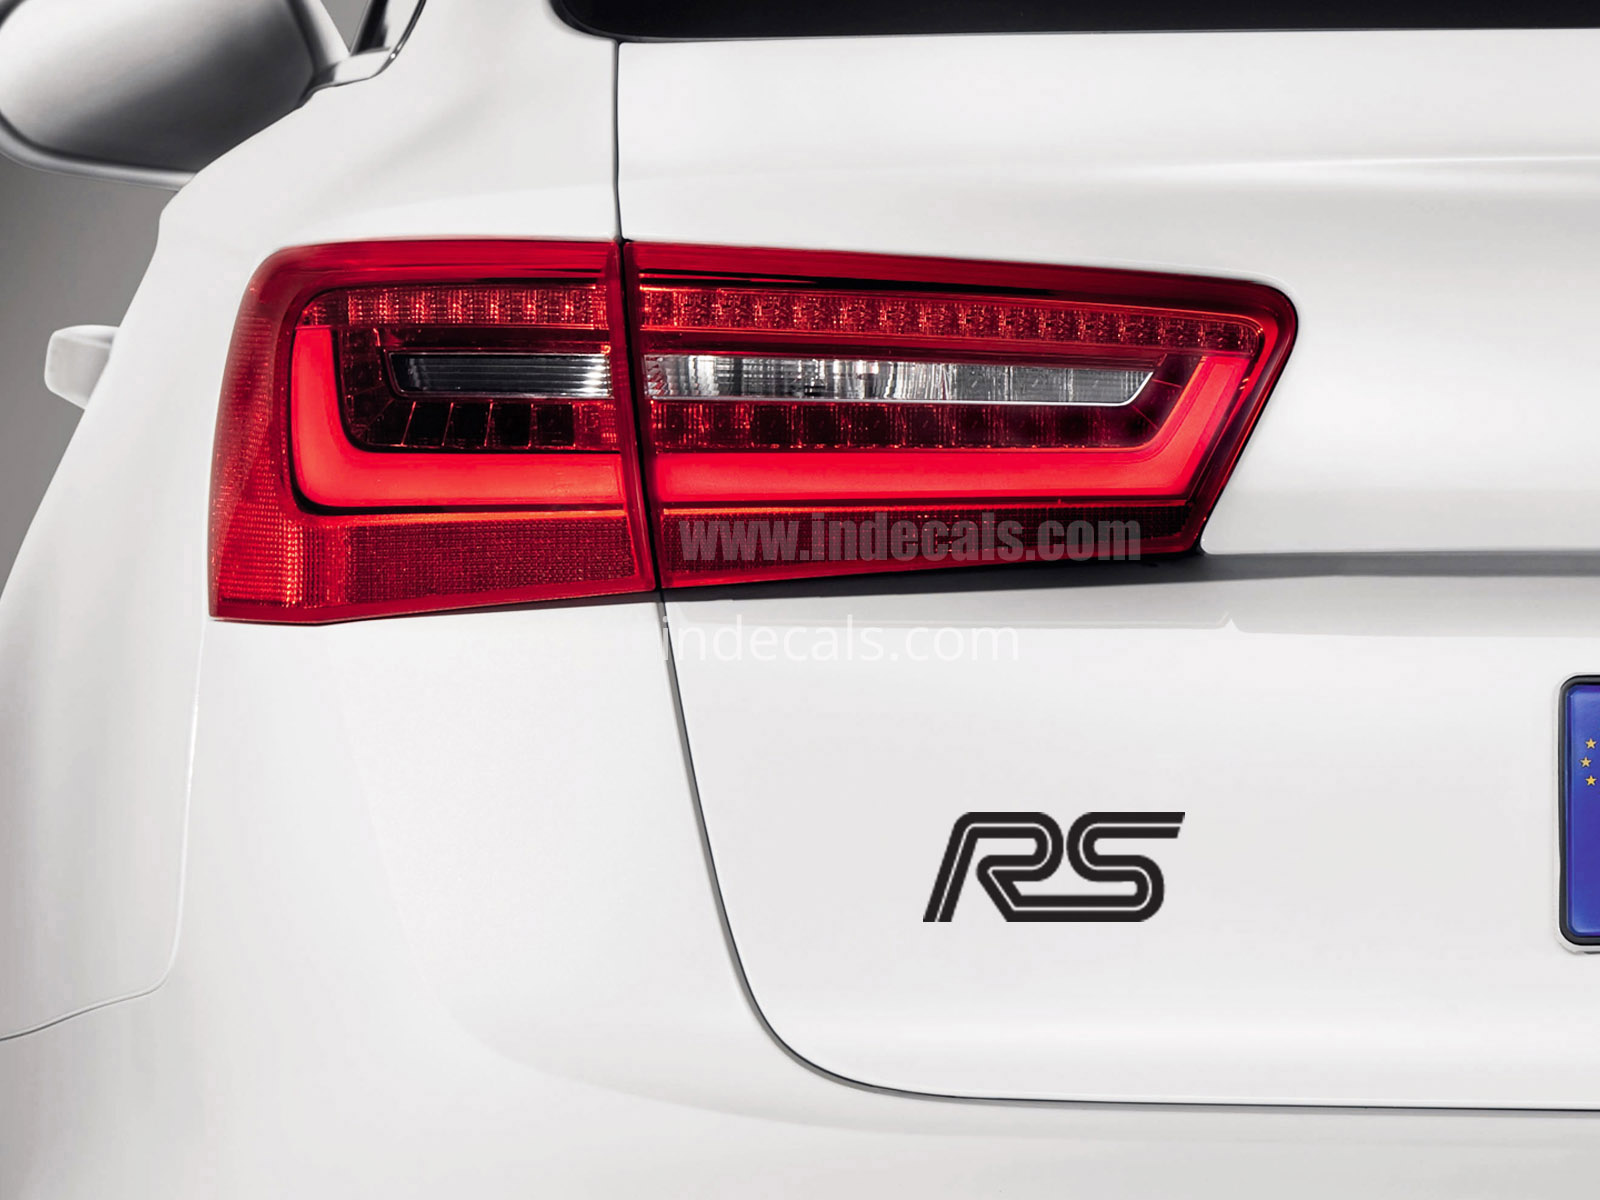 3 x Ford RS Stickers for Trunk - Black